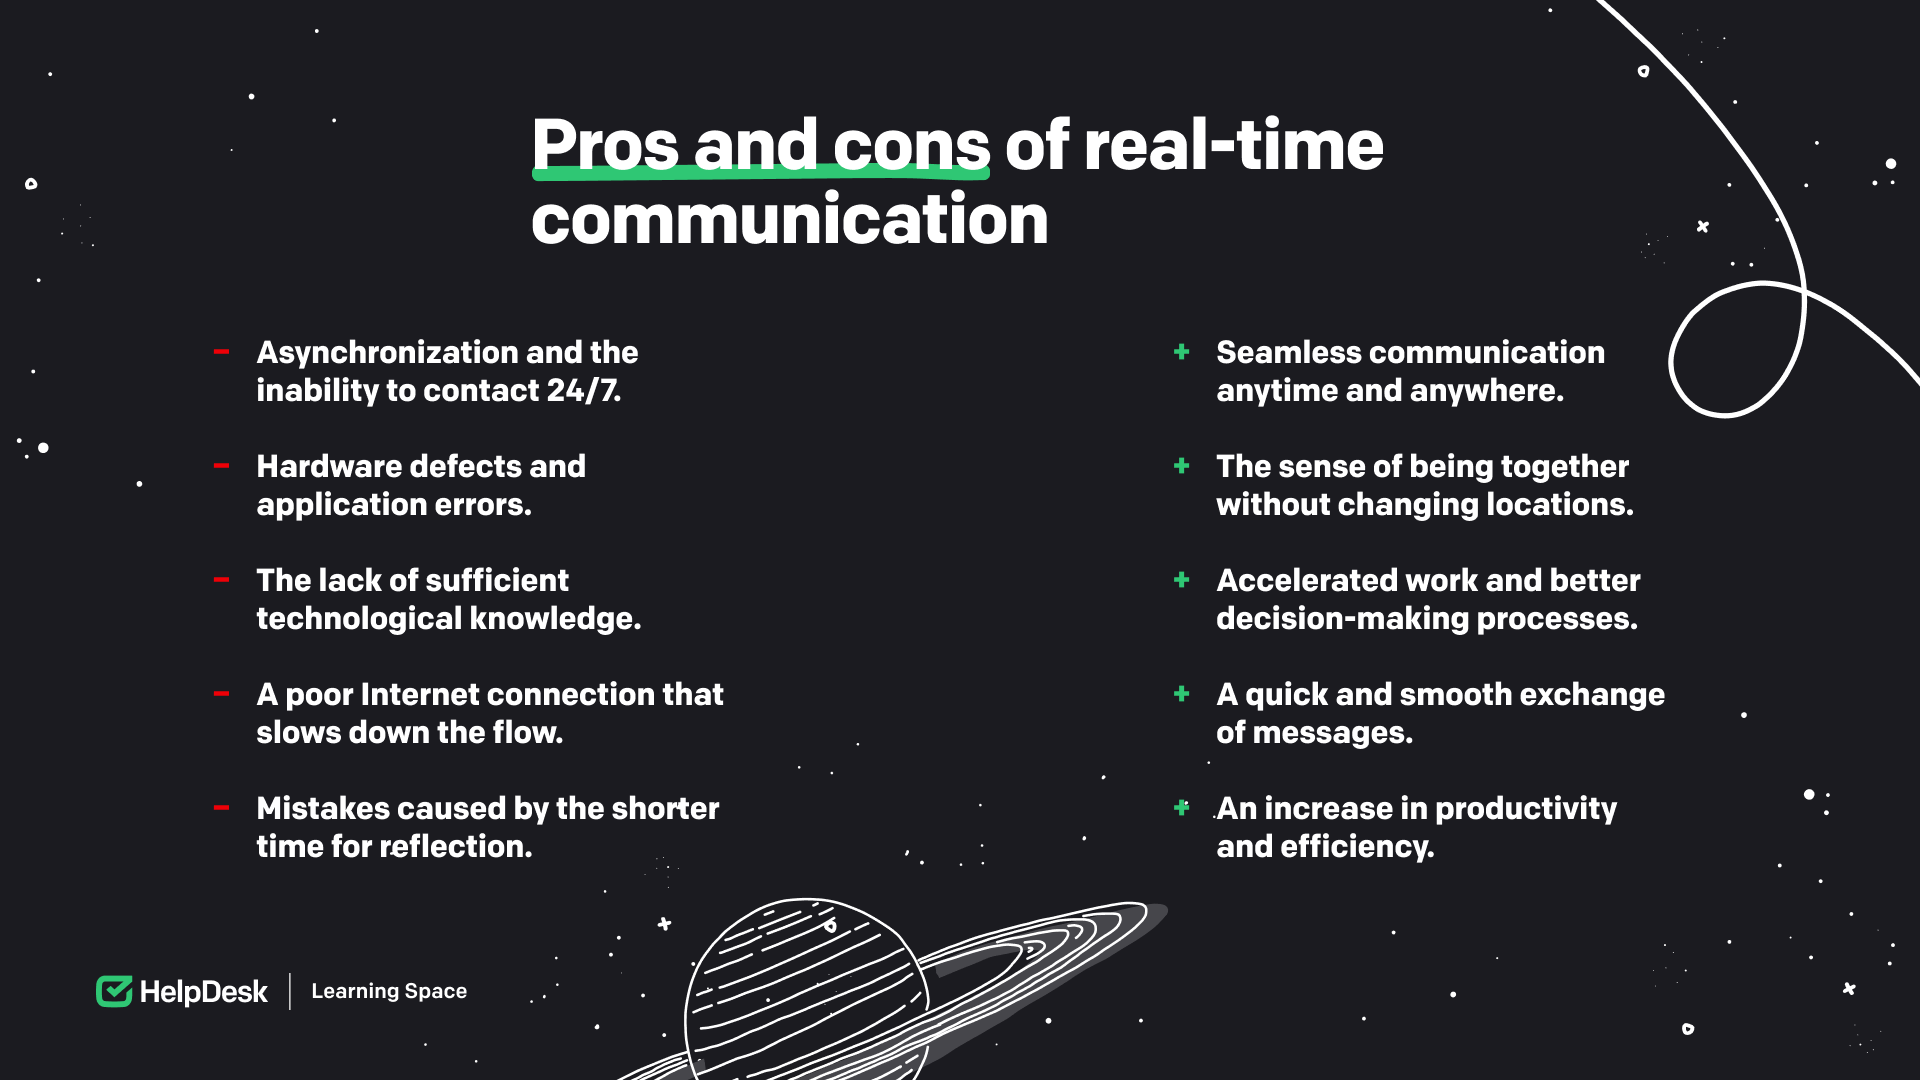 Pros and cons of real-time communication.